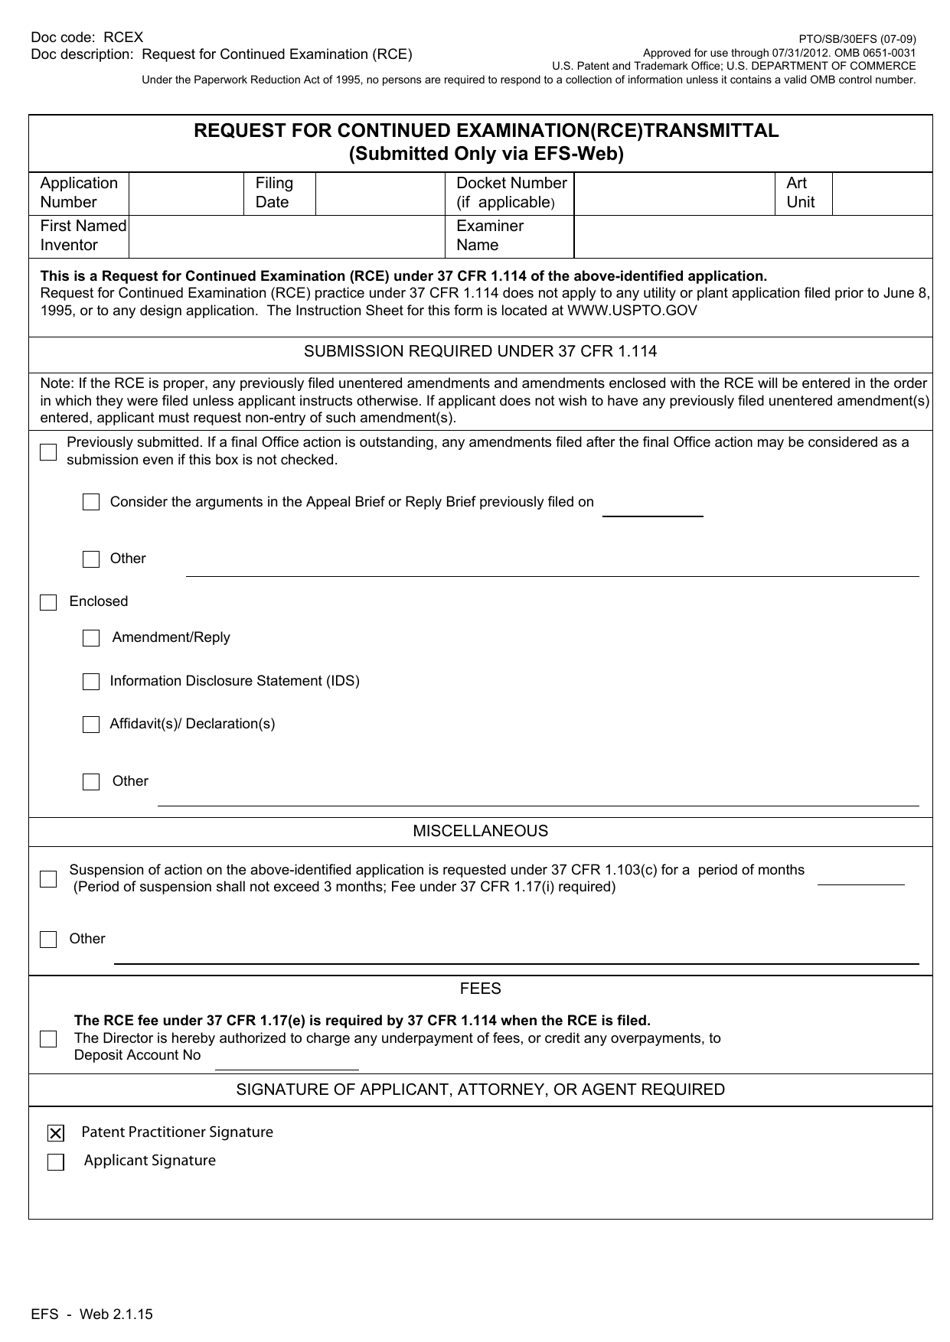 Form PTO / SB / 30EFS Request for Continued Examination (Rce) Transmittal, Page 1